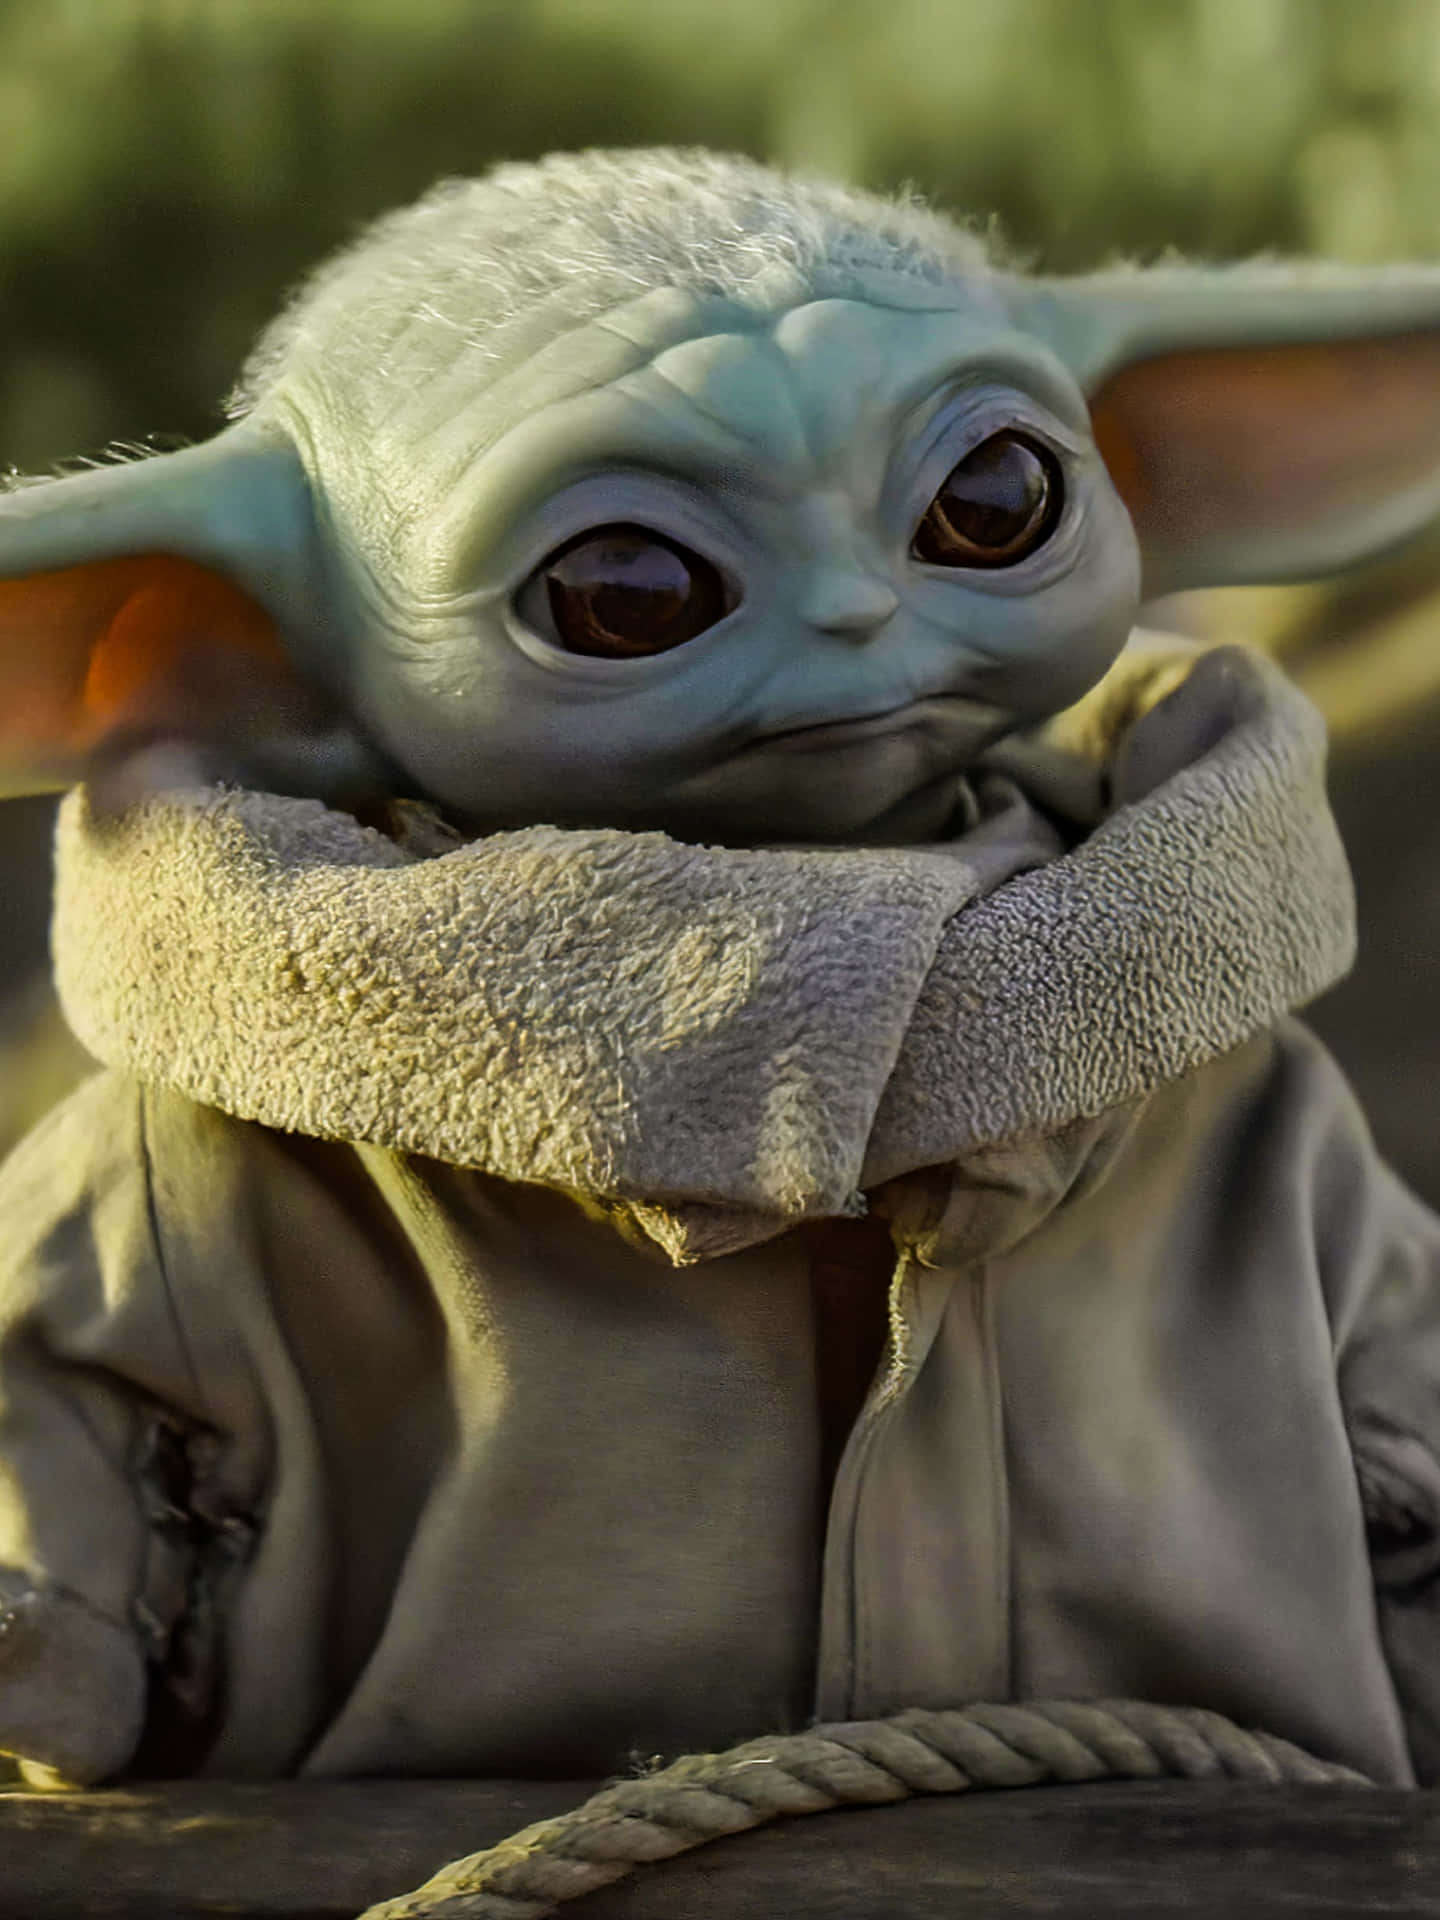 Get ready to experience the cuteness of Baby Yoda with this amazing new phone! Wallpaper